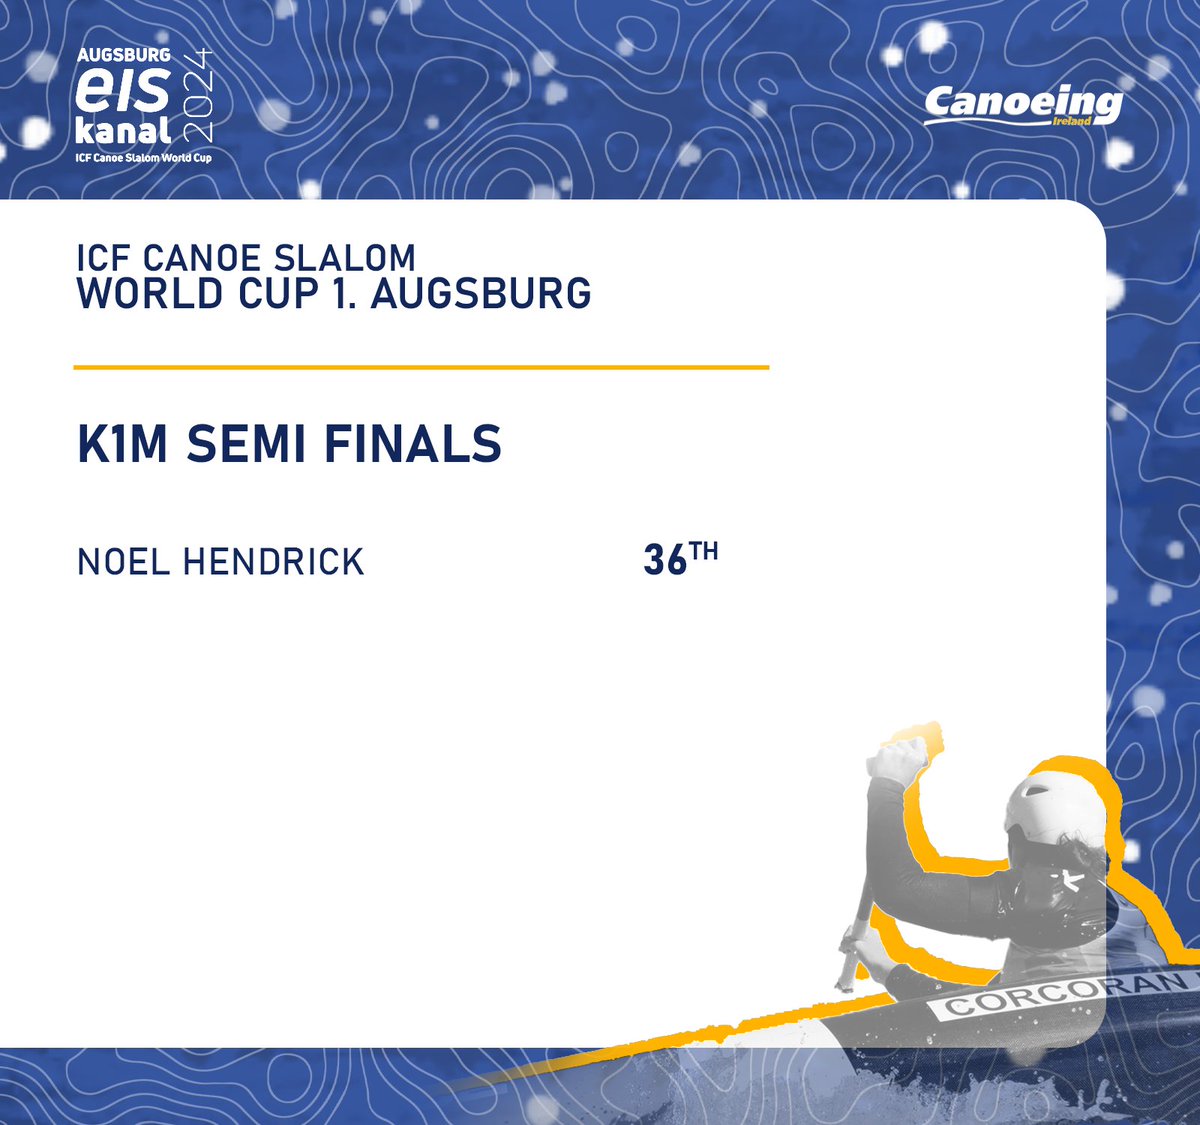 The Canoeing heats began today, and brought with it some edge of the seat performances. A strong achievement with Liam Jegou qualifying in 9th place in the C1M first run. 

The K1M semi finals had Noel Hendrick coming in 36th place.

Check out the results via the link below;